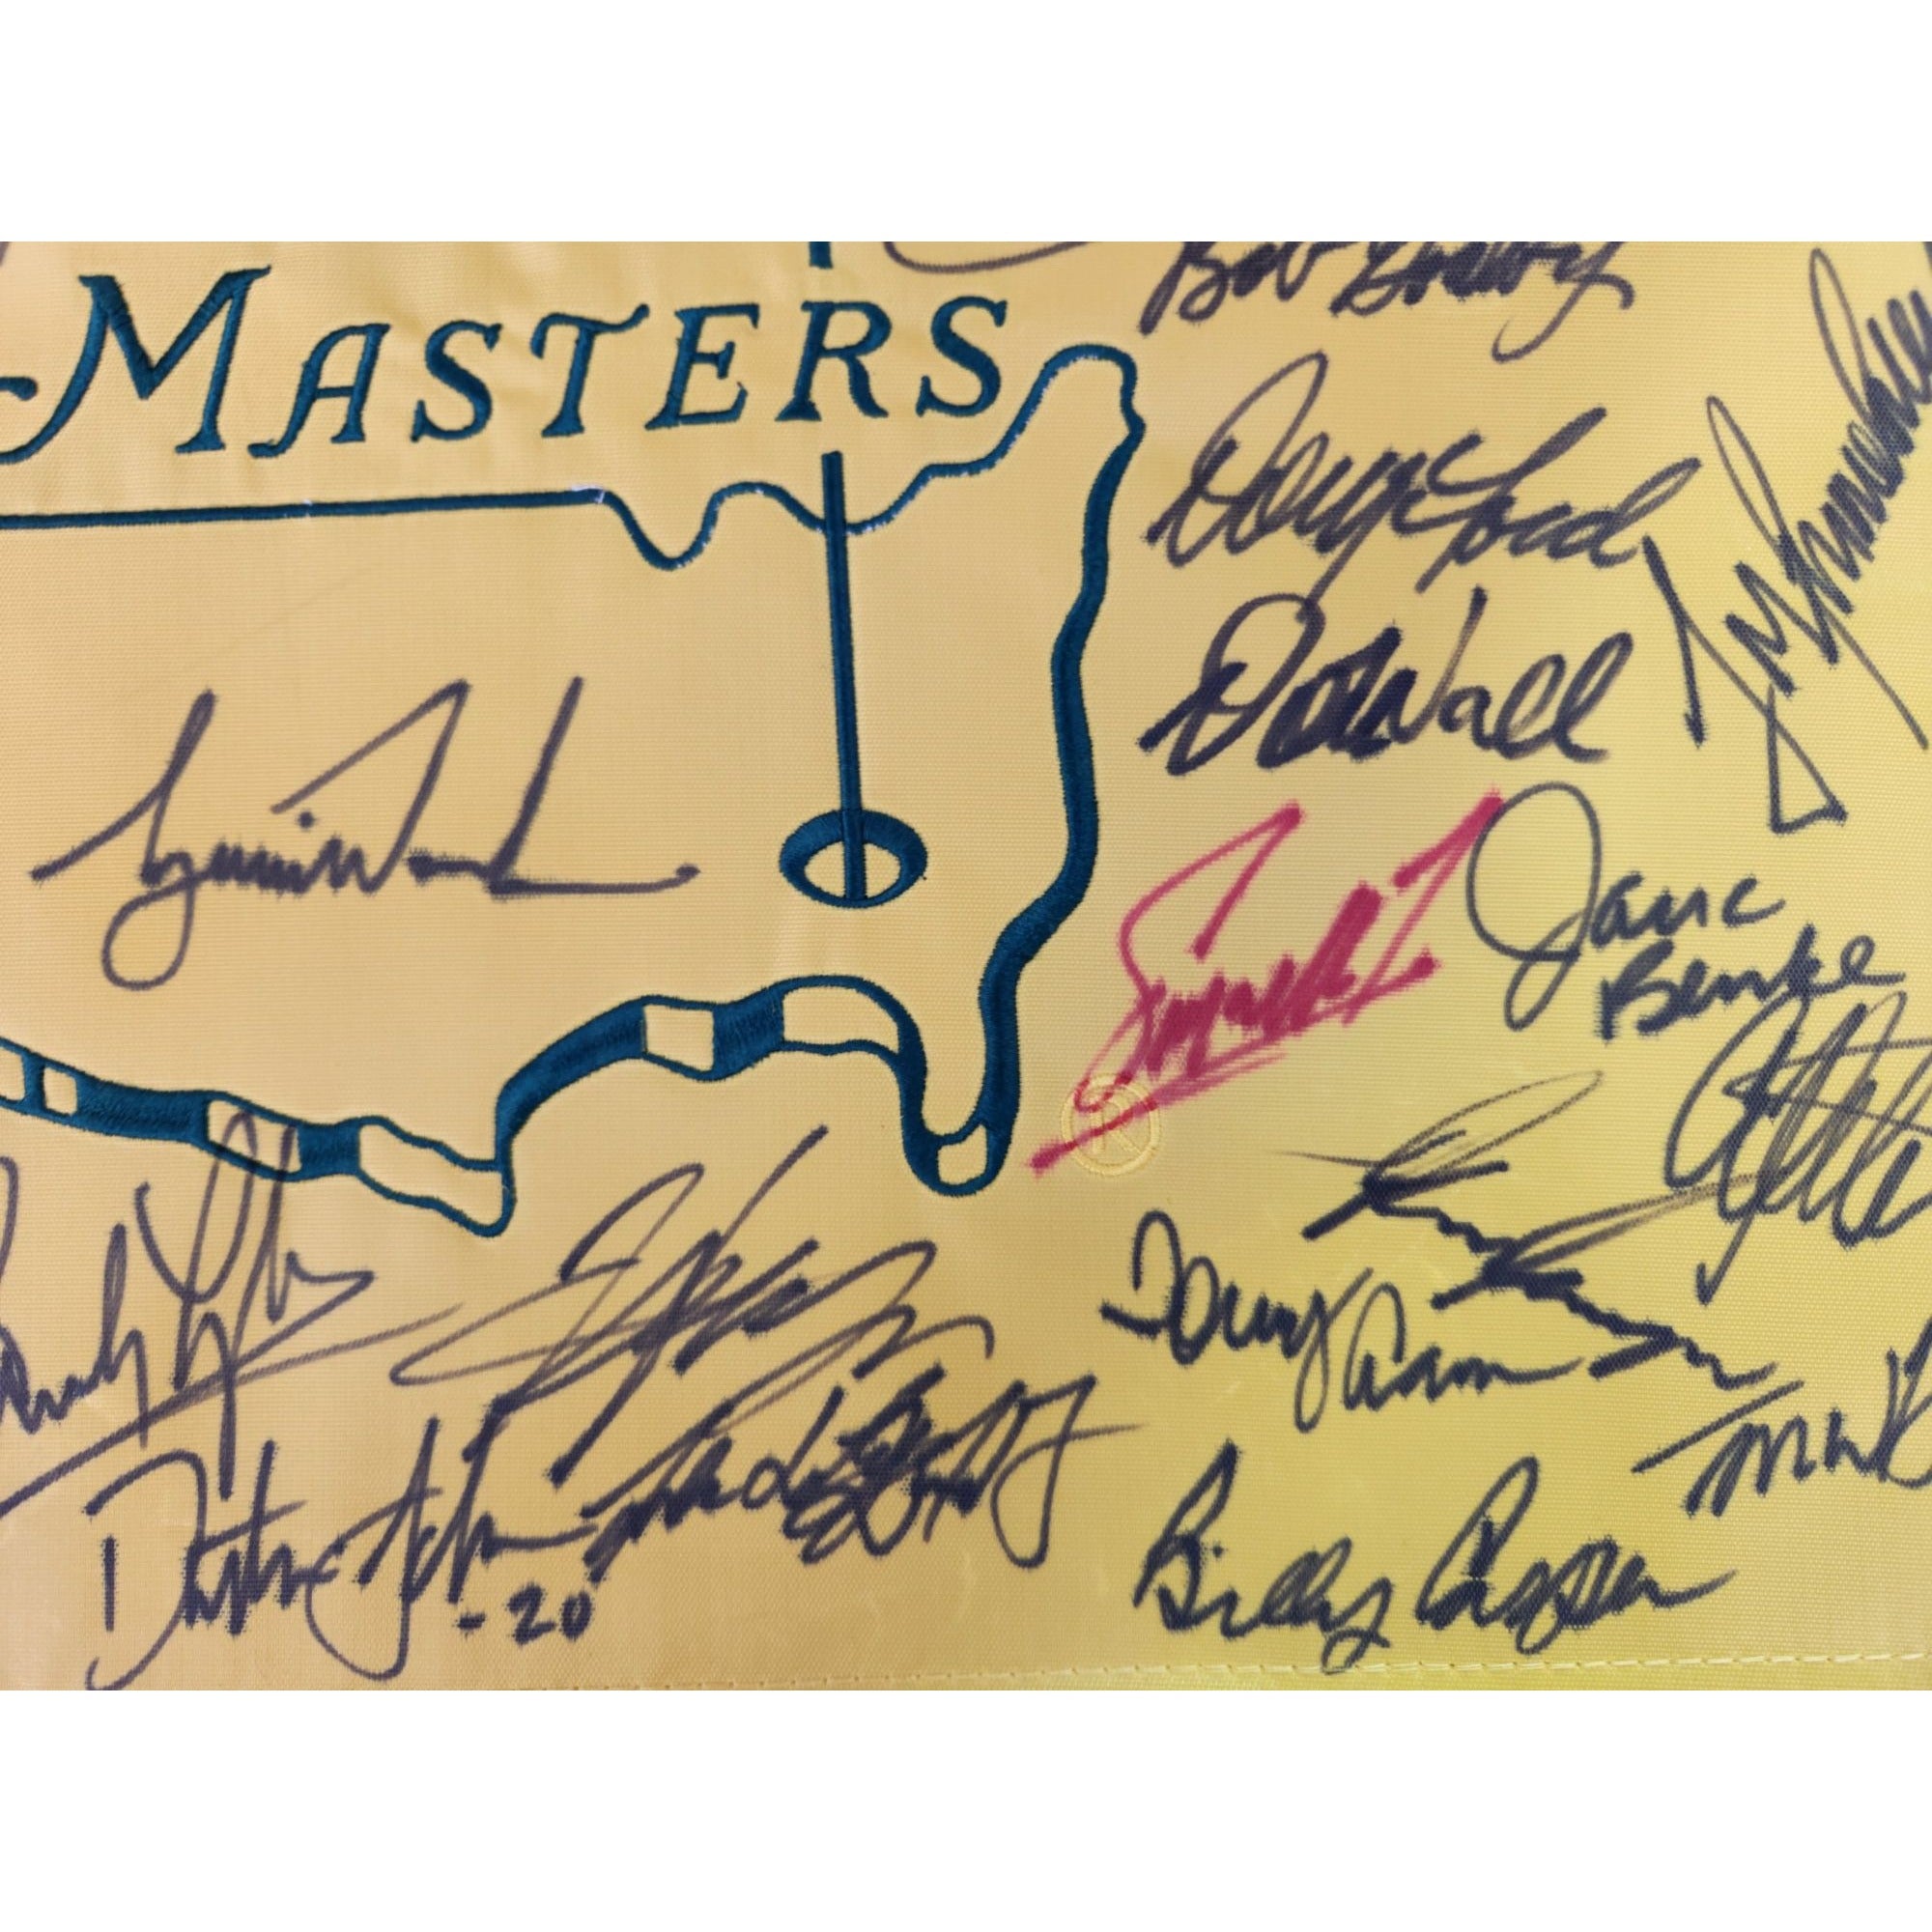 Masters champions Sam Sneed Jack Nicklaus Tiger Woods Arnold Palmer Phil Mickelson 30 former Champions signed with proof